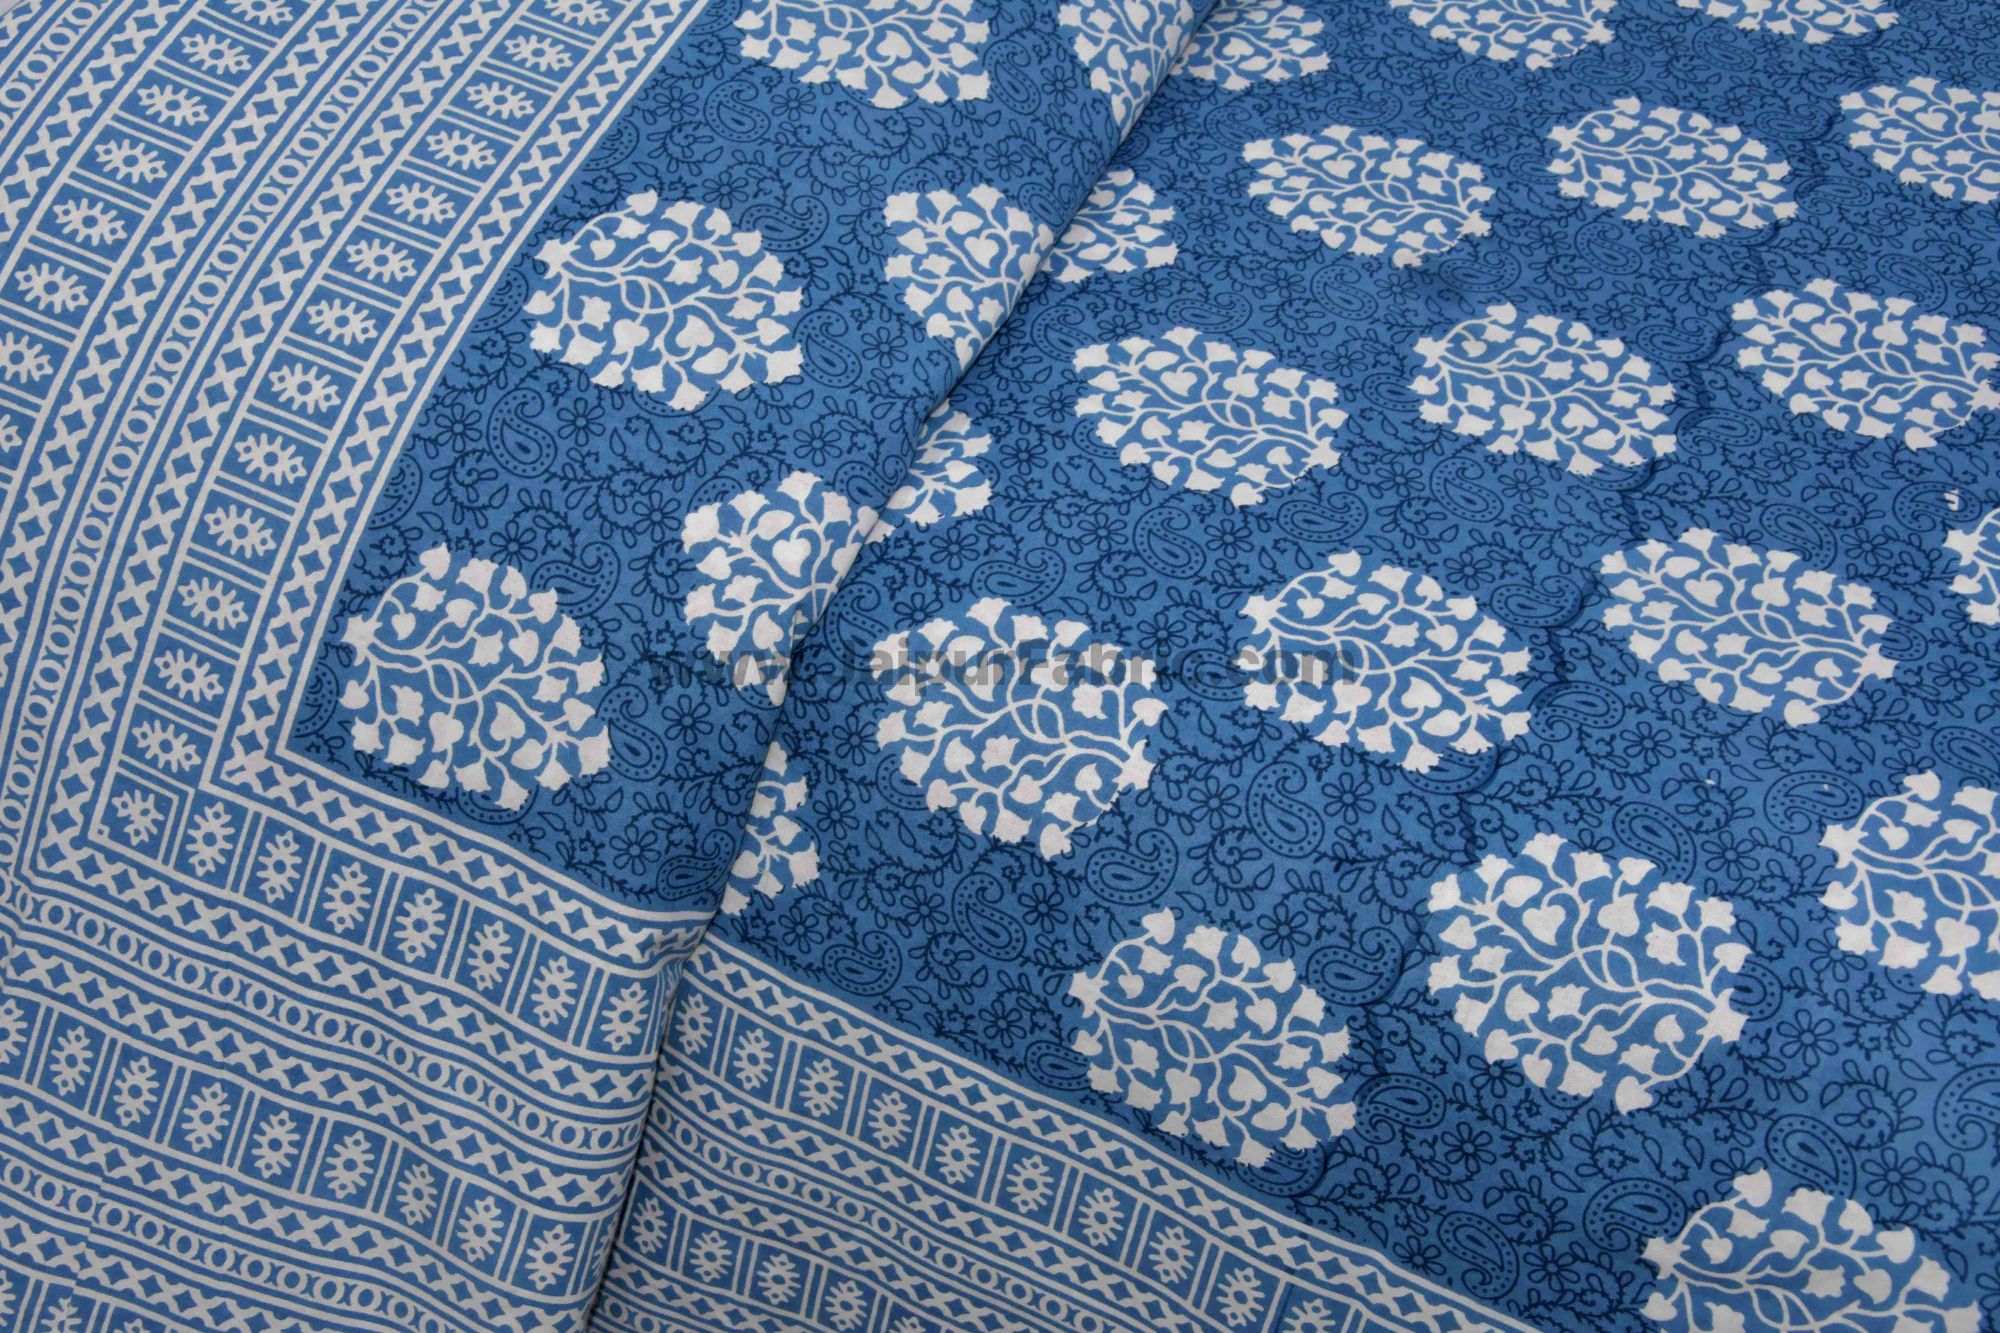 Blue Traditional Badge Double Bedsheet